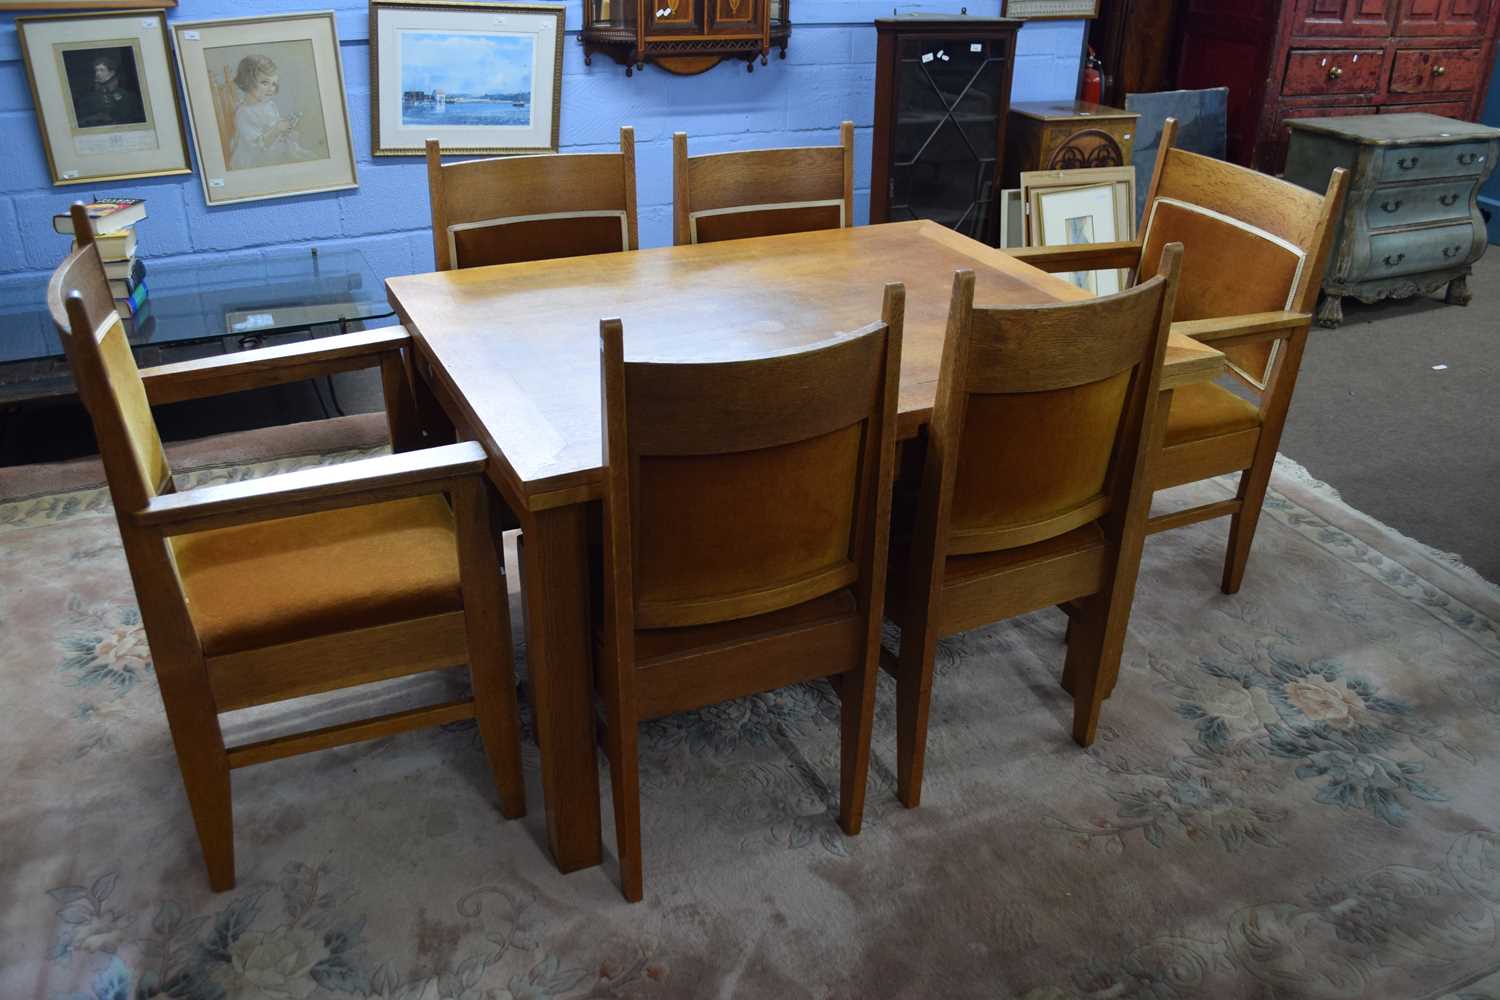 An unusual early 20th century set of six oak framed dining chairs with push-out upholstered seats